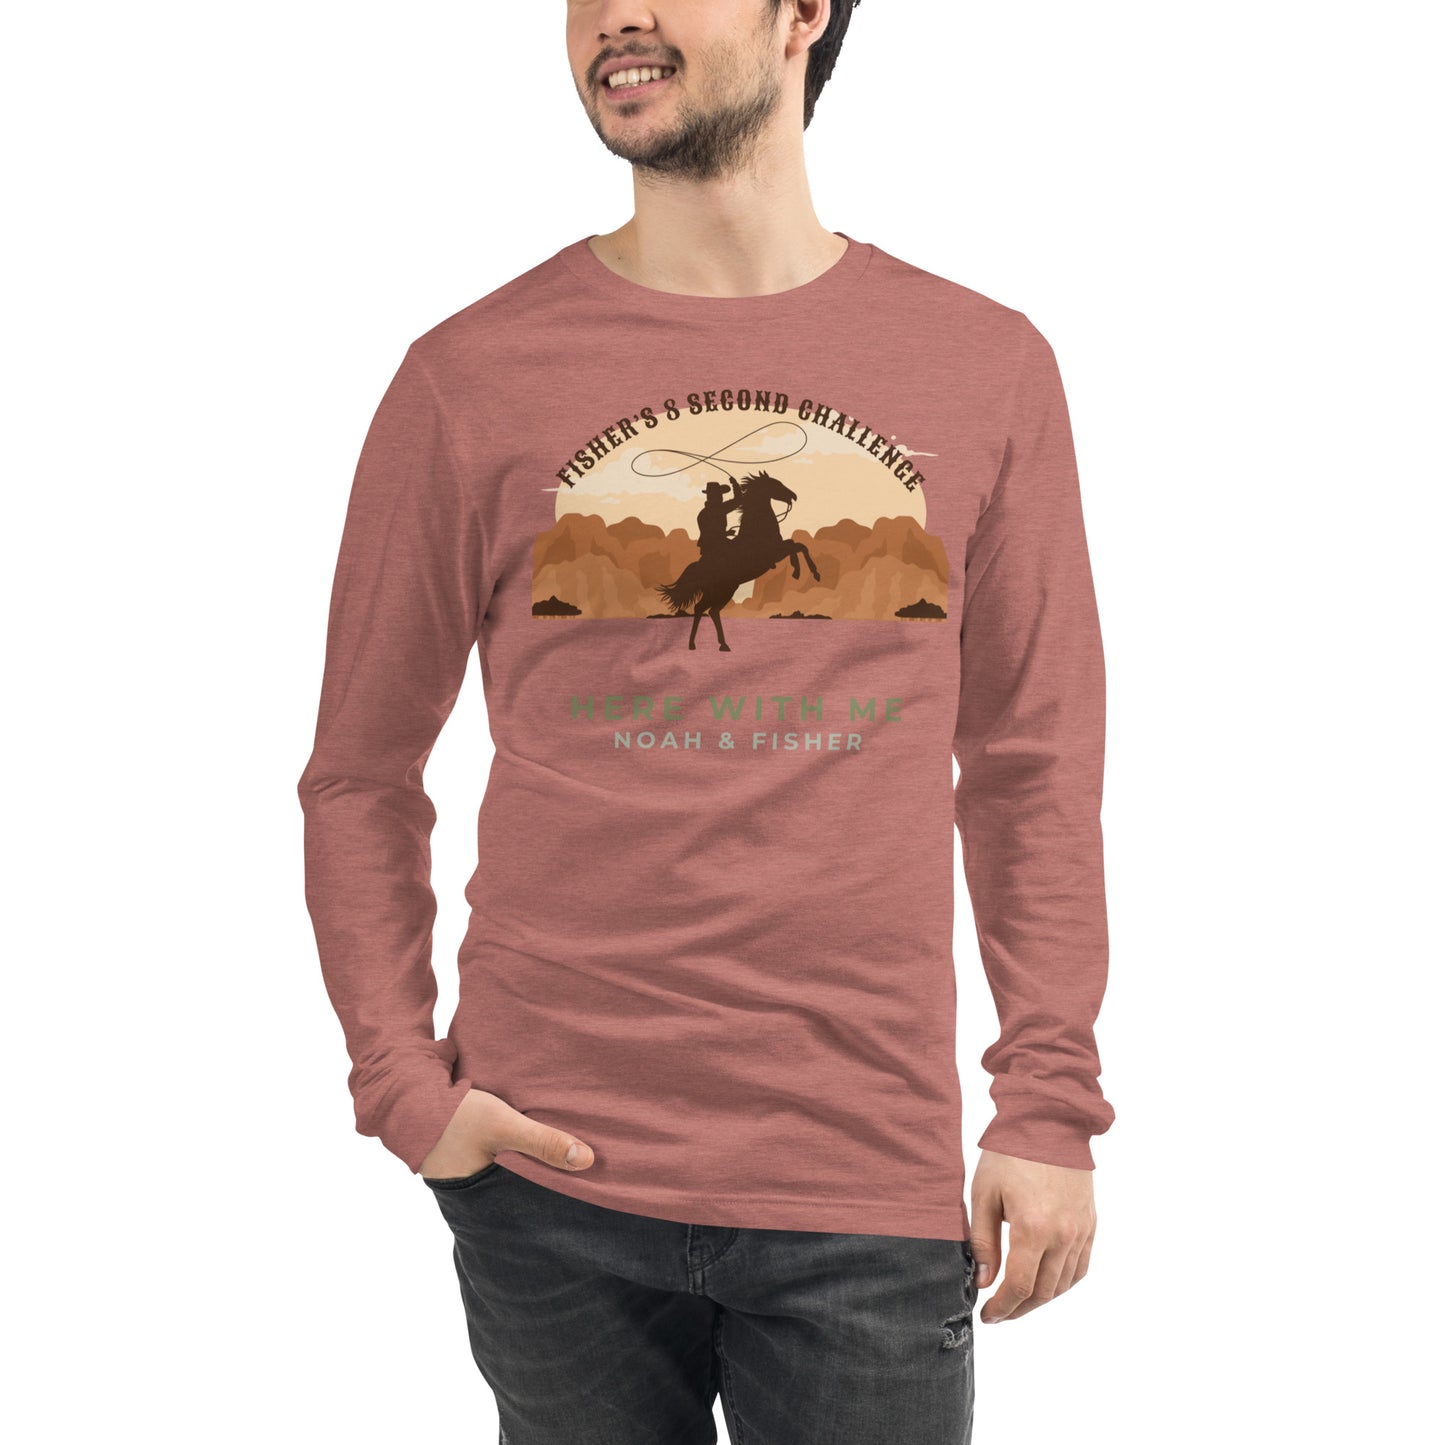 "Fisher's 8 Second Challenge" [Here With Me] Unisex Long Sleeve Tee